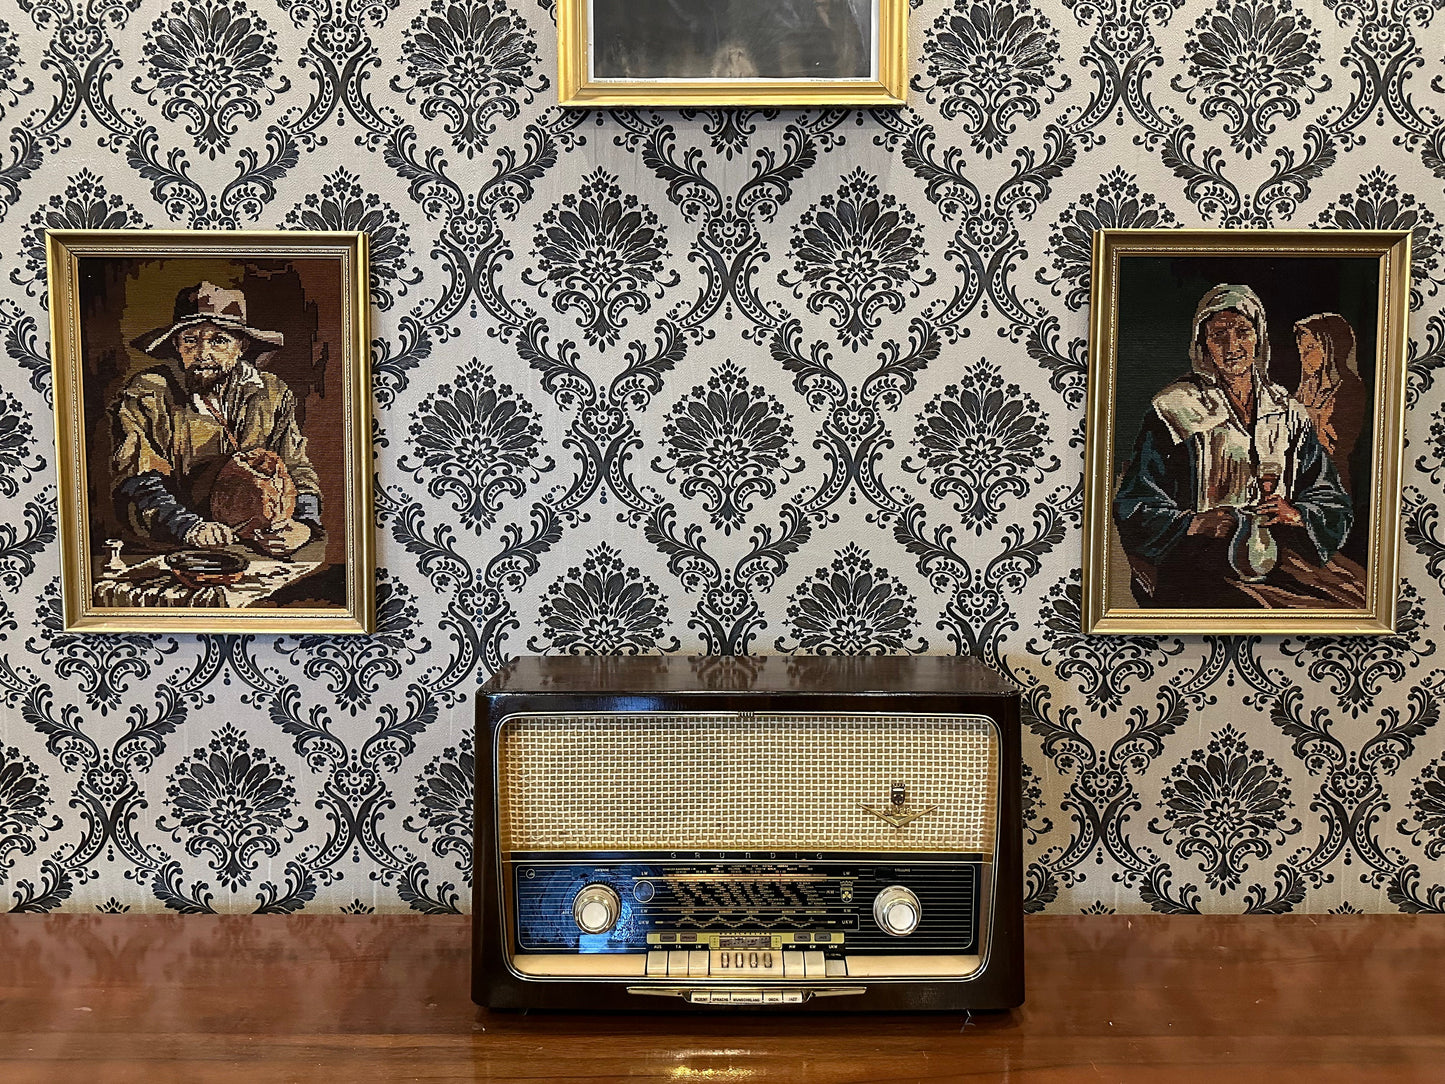 Grundig Radio - Embrace the Vintage Melodies in Style